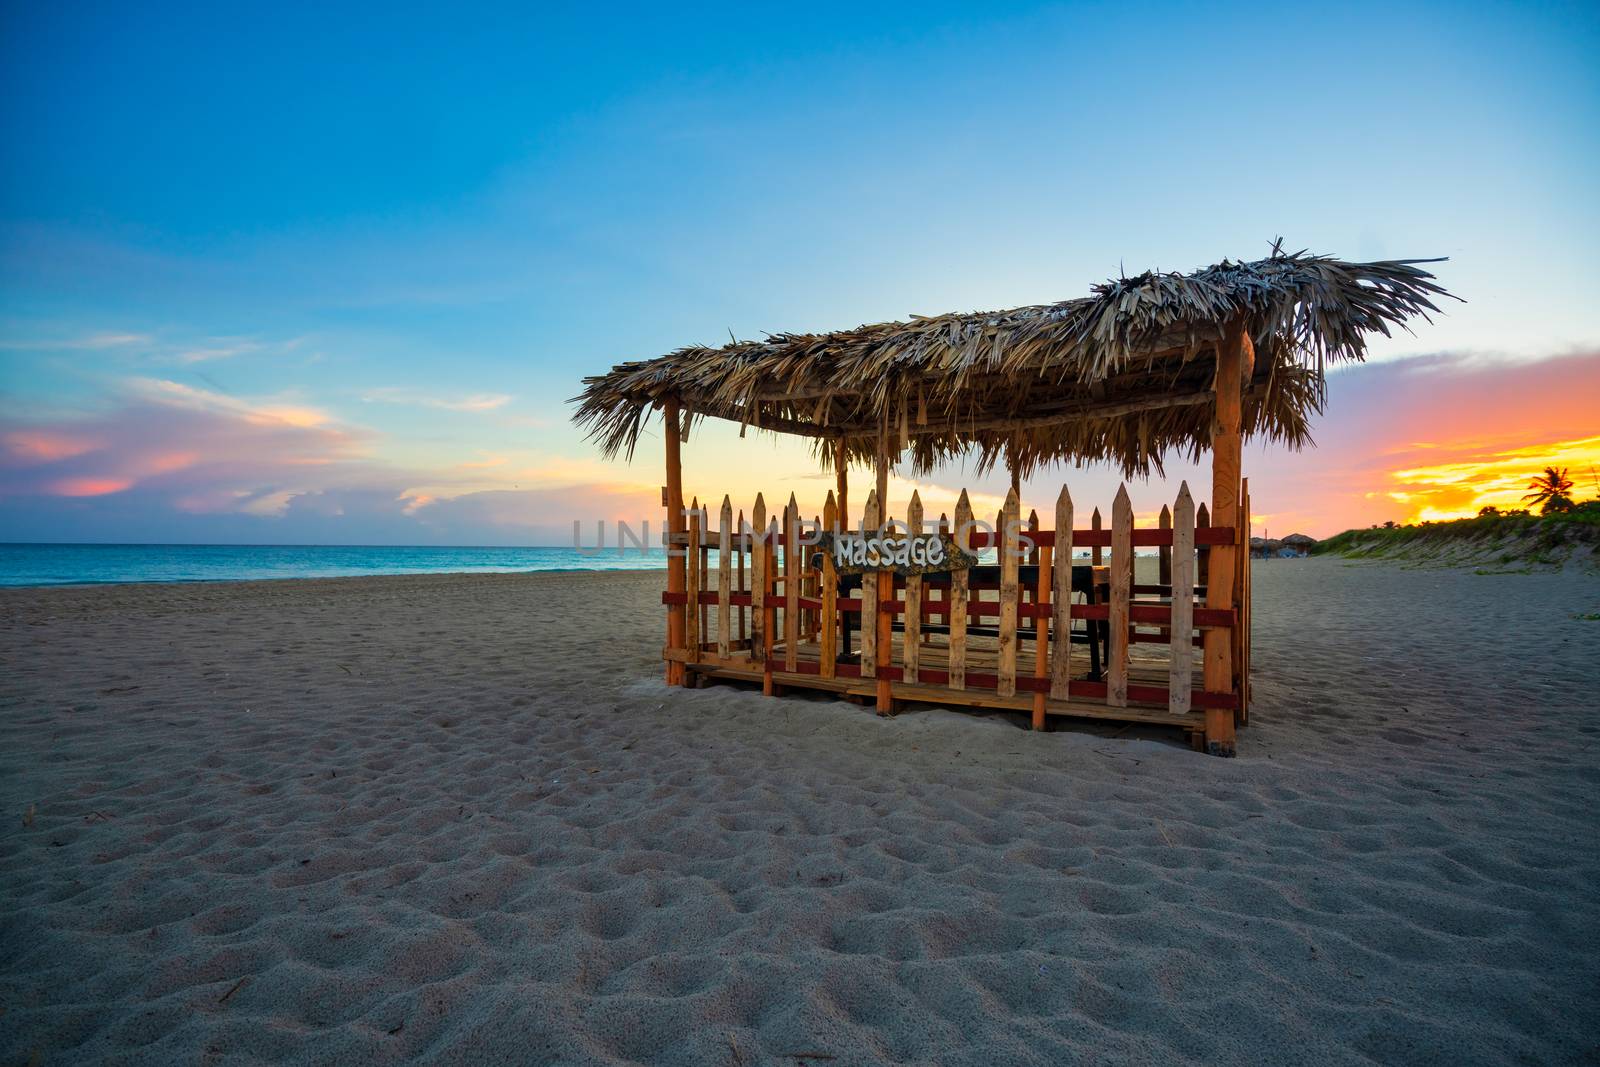 Beautiful beach of Varadero at sunset,in the middle a wooden and straw awning for massages on the beach, Varadero Cuba.